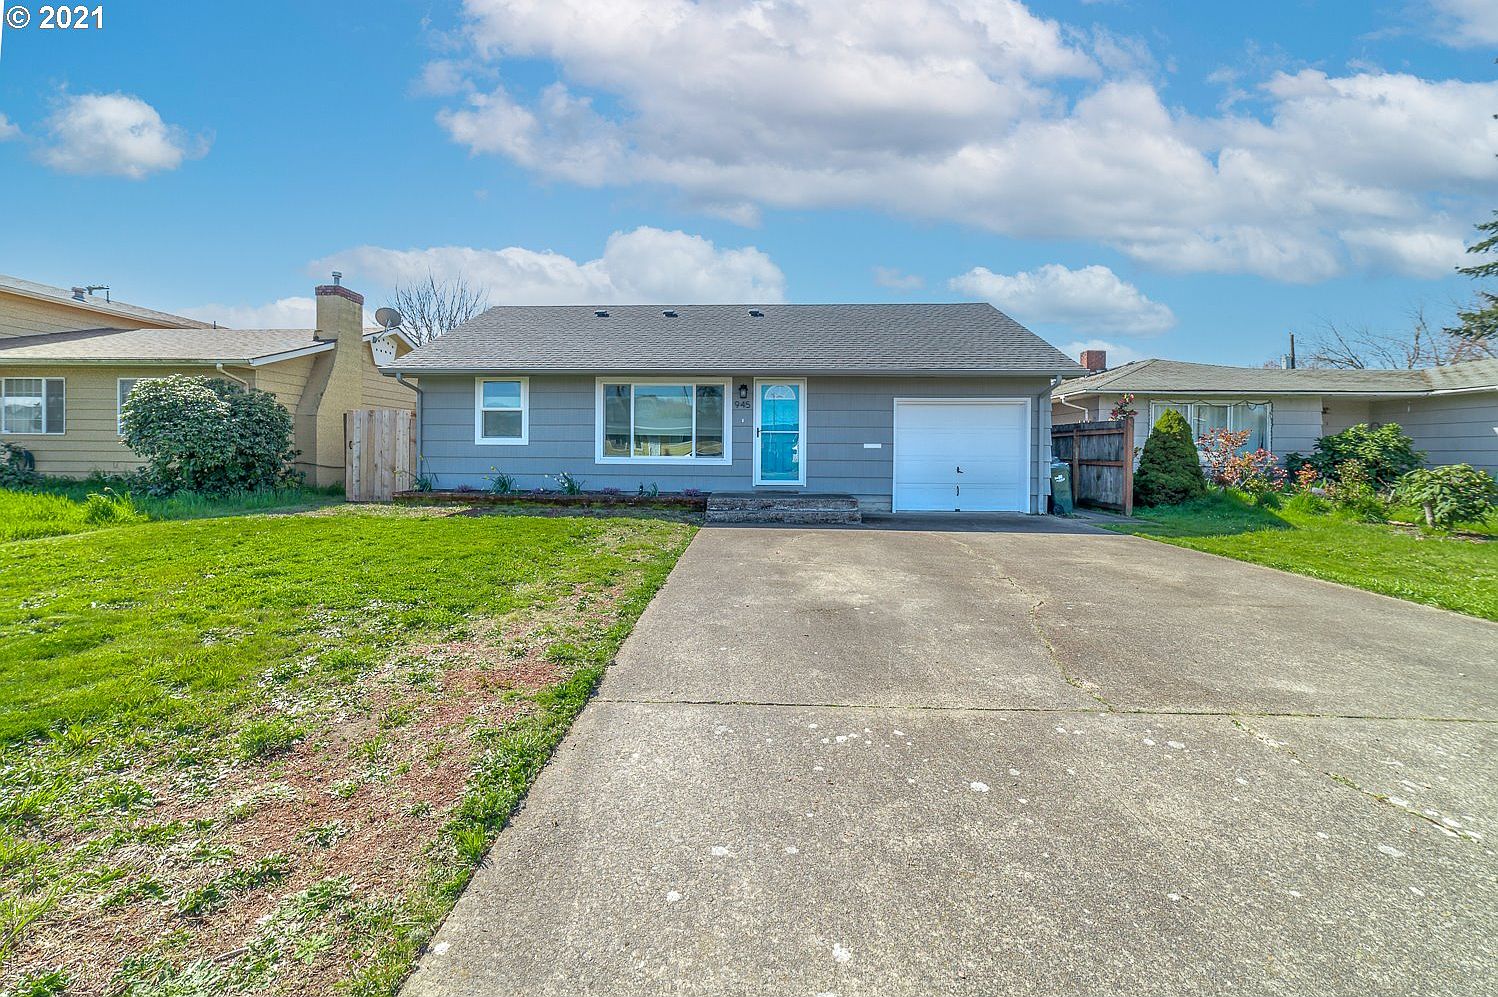 20 Olympic St, Springfield, OR 20   MLS 20   Zillow